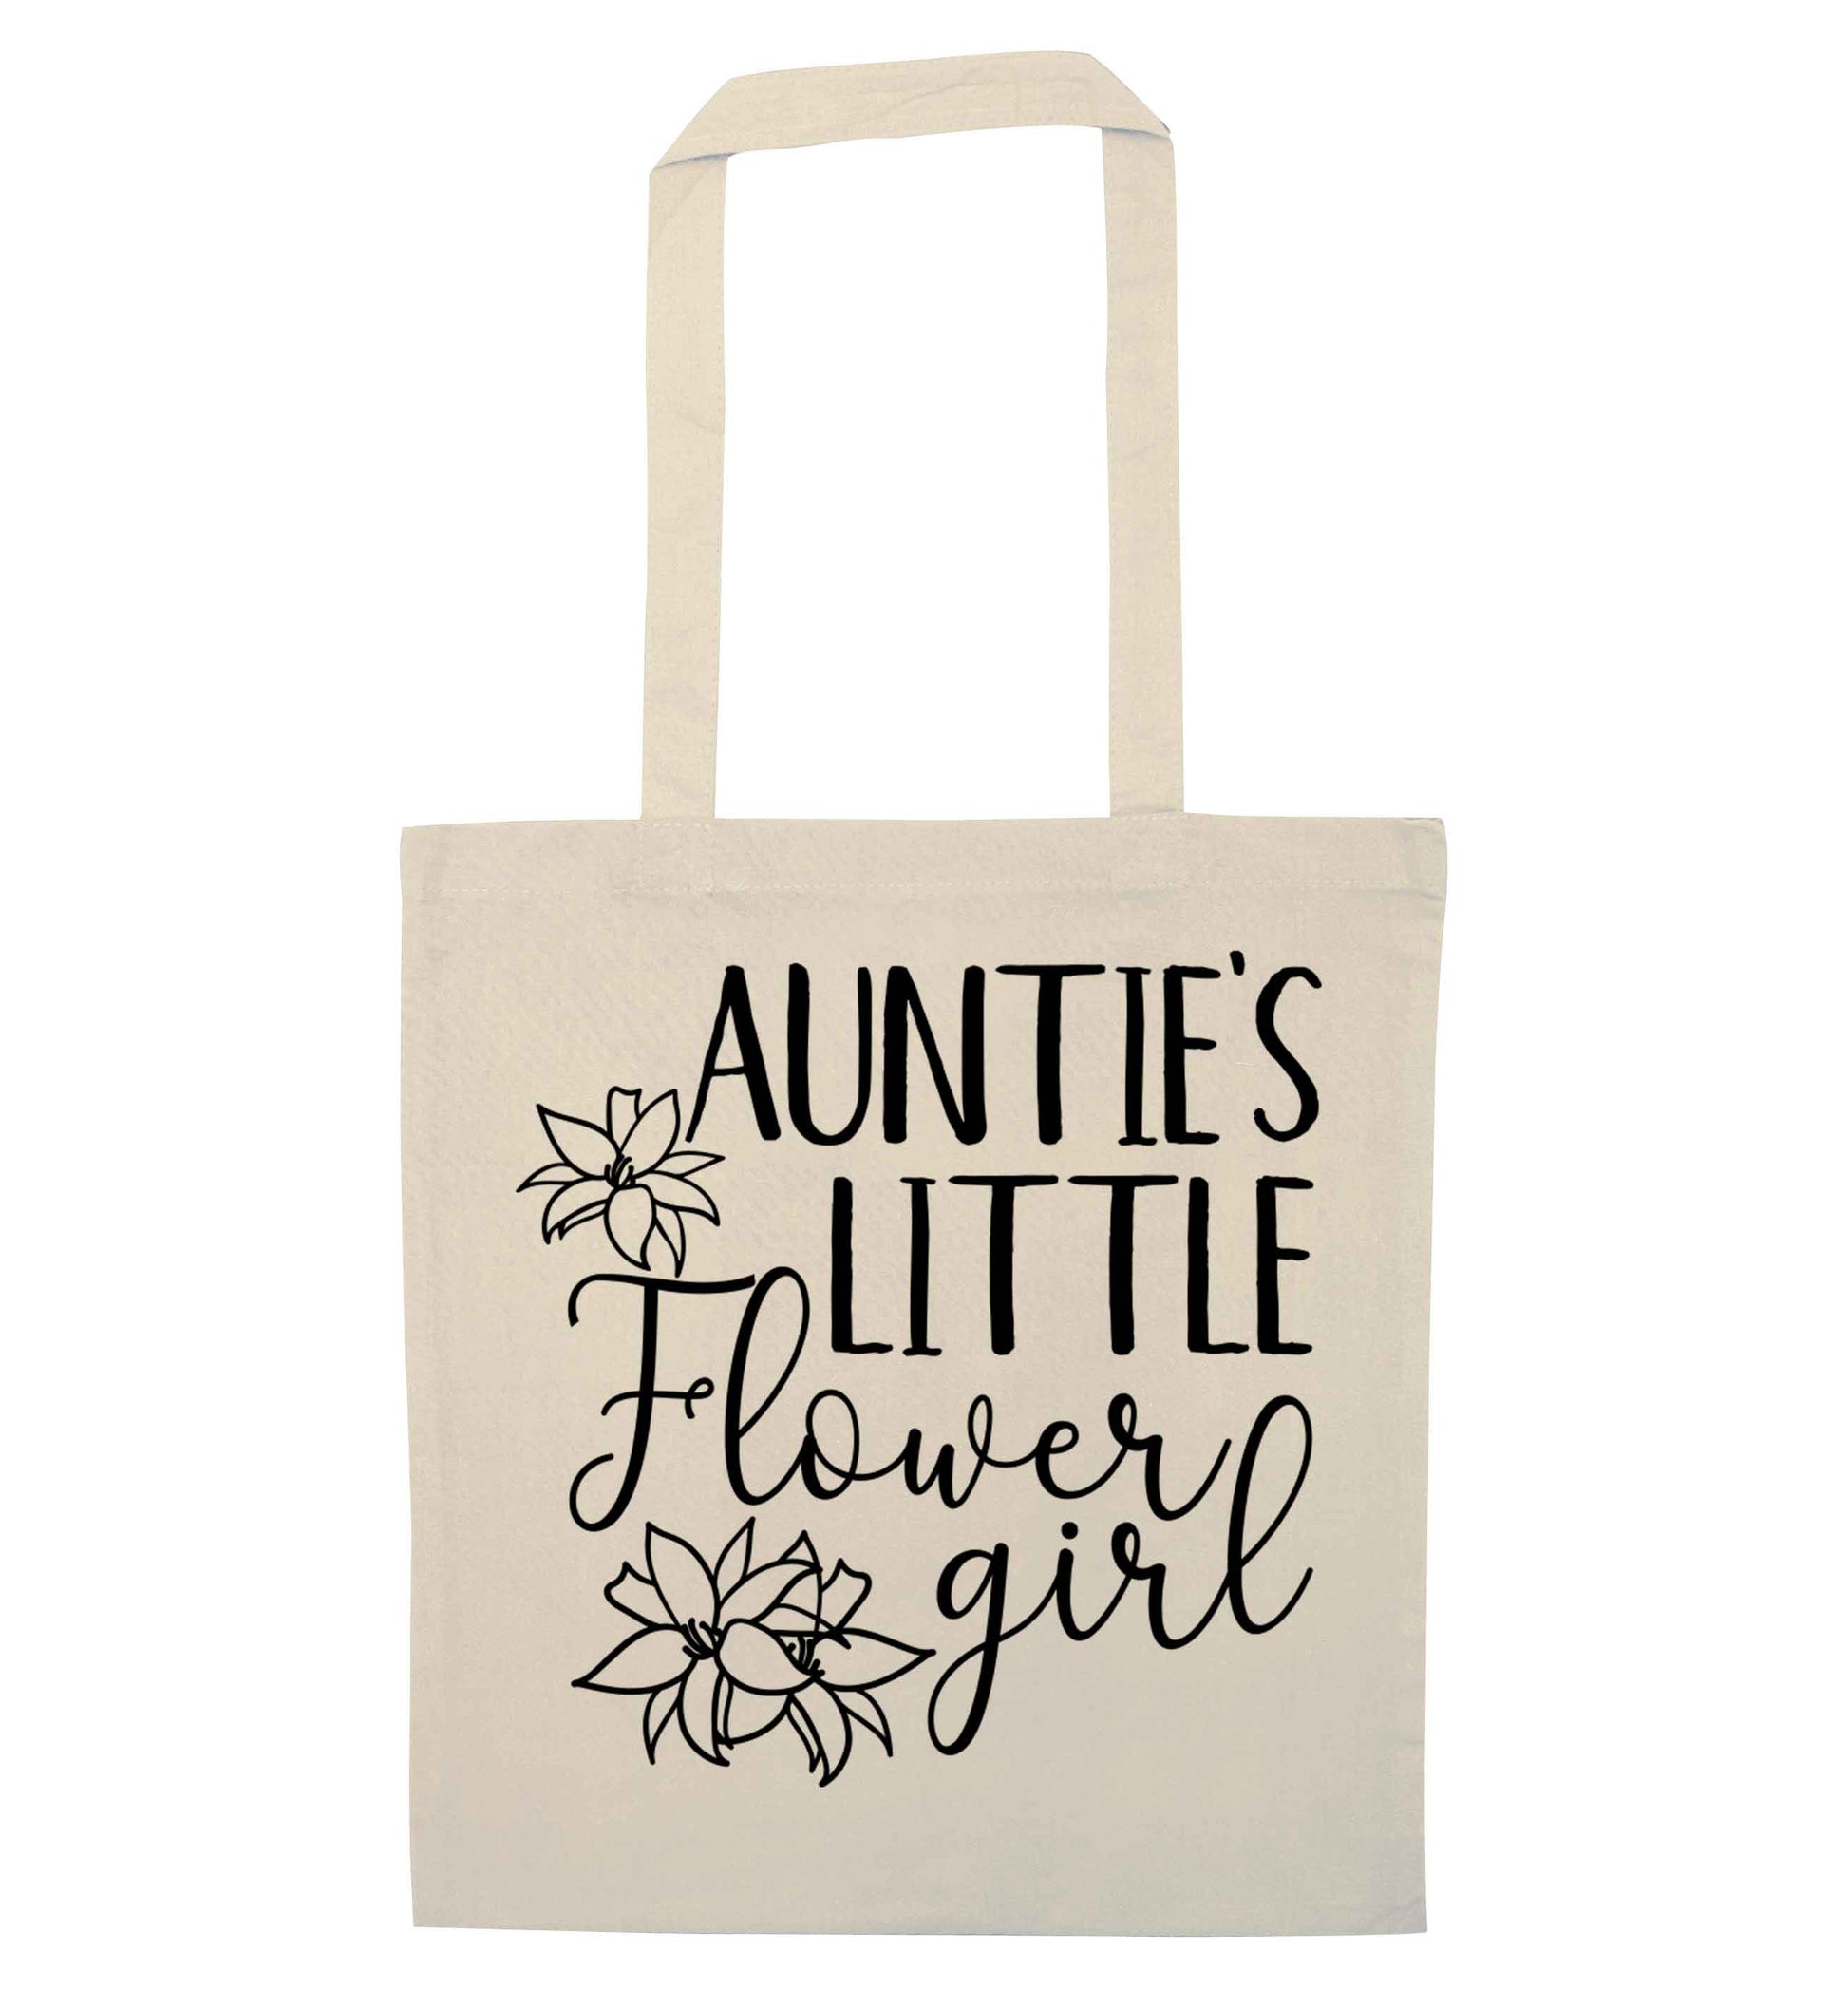 Perfect wedding guest favours or hen party gifts! Personalised bridal floral wreath designs, any name, any role! natural tote bag